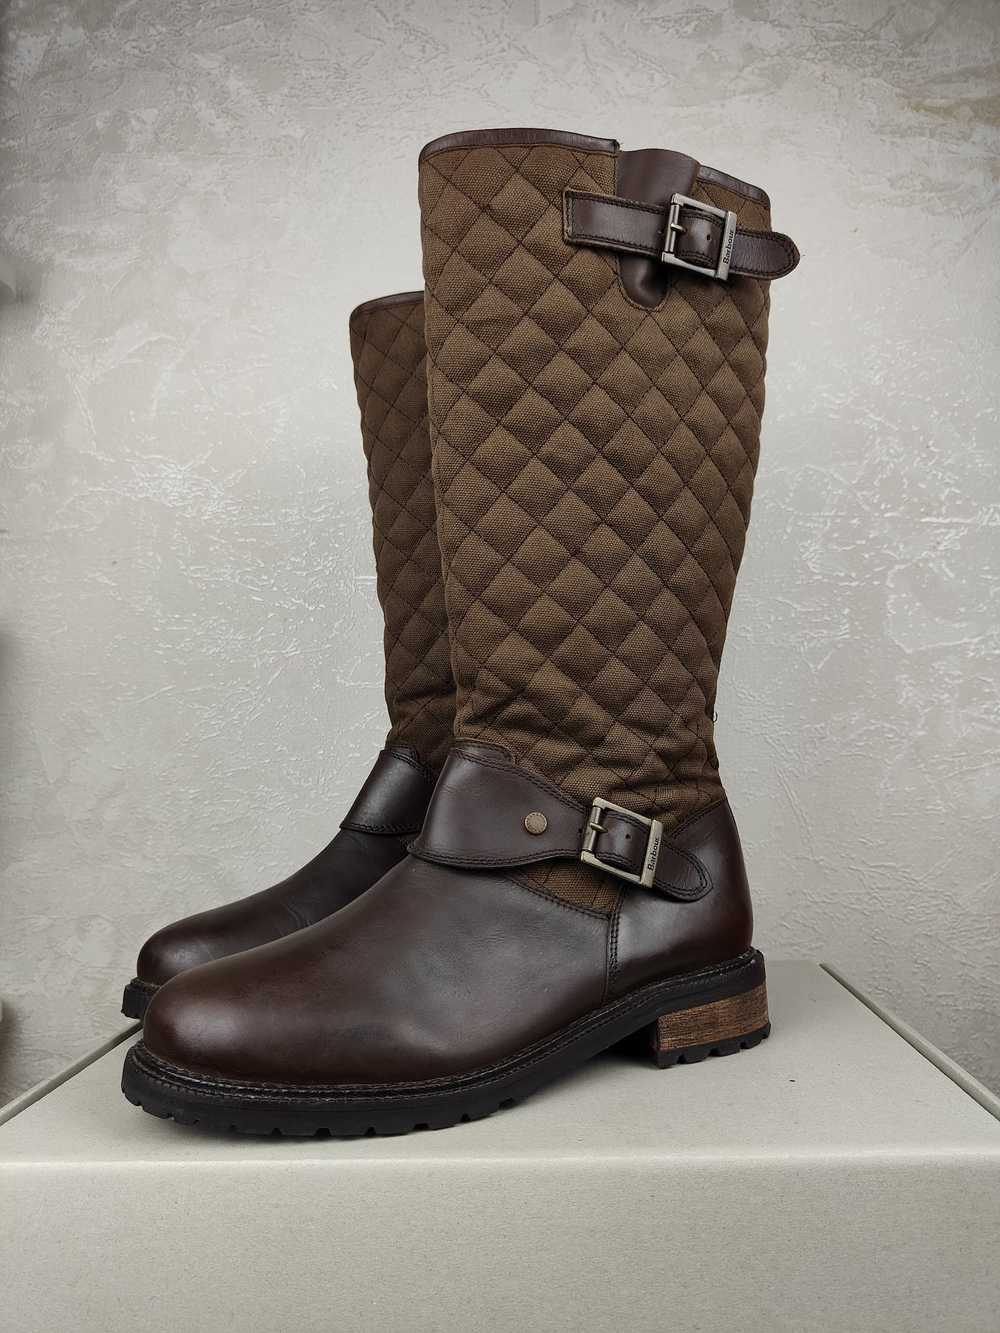 Barbour Barbour International Quilted Boots - image 1